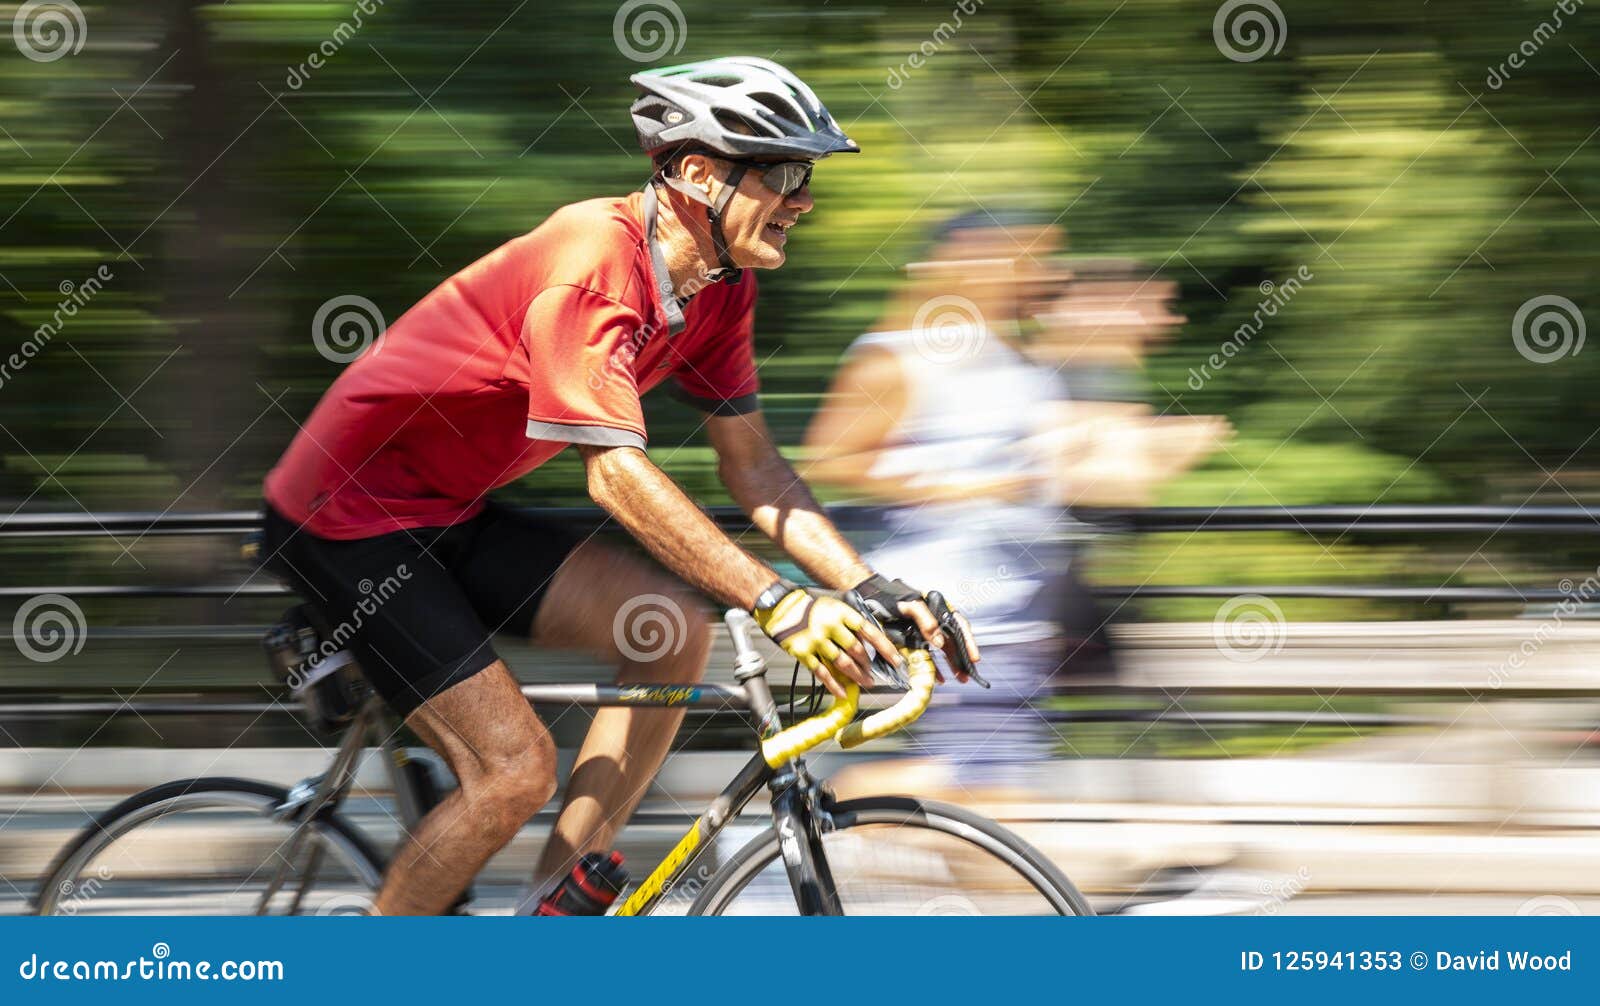 Riding Bike Fast with Blurred Background Editorial Stock Photo - Image of  focus, abstract: 125941353